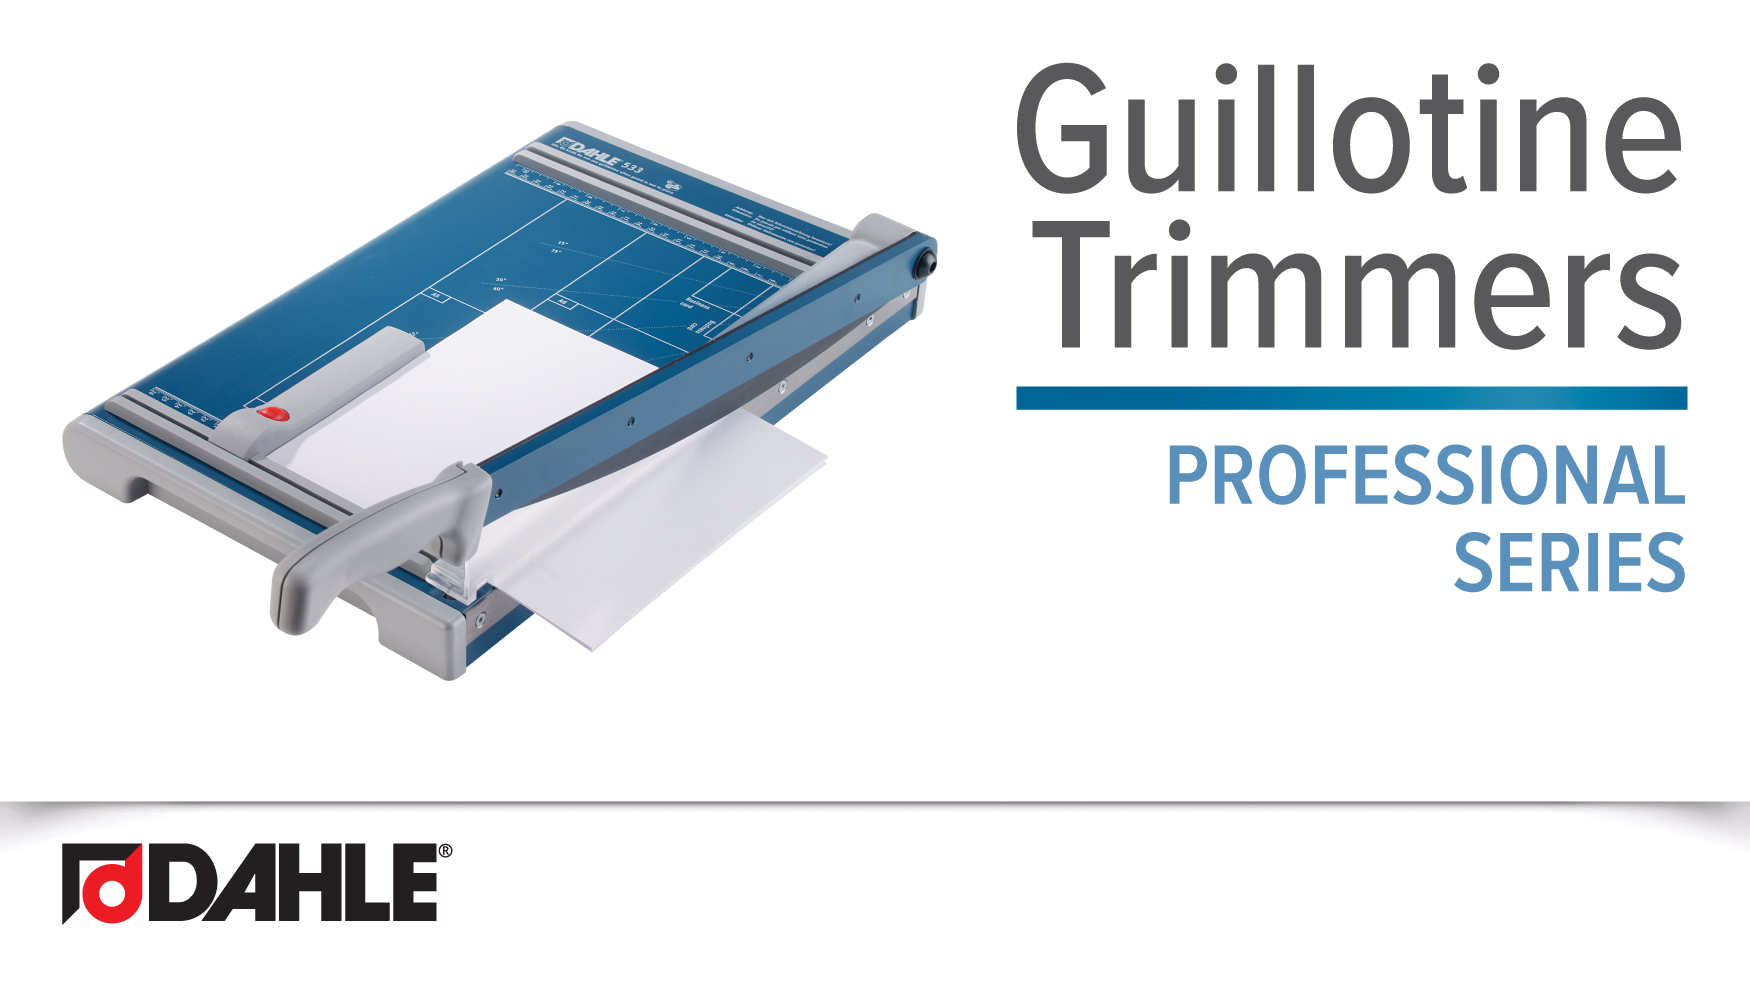 Dahle 560 Professional Guillotine Video